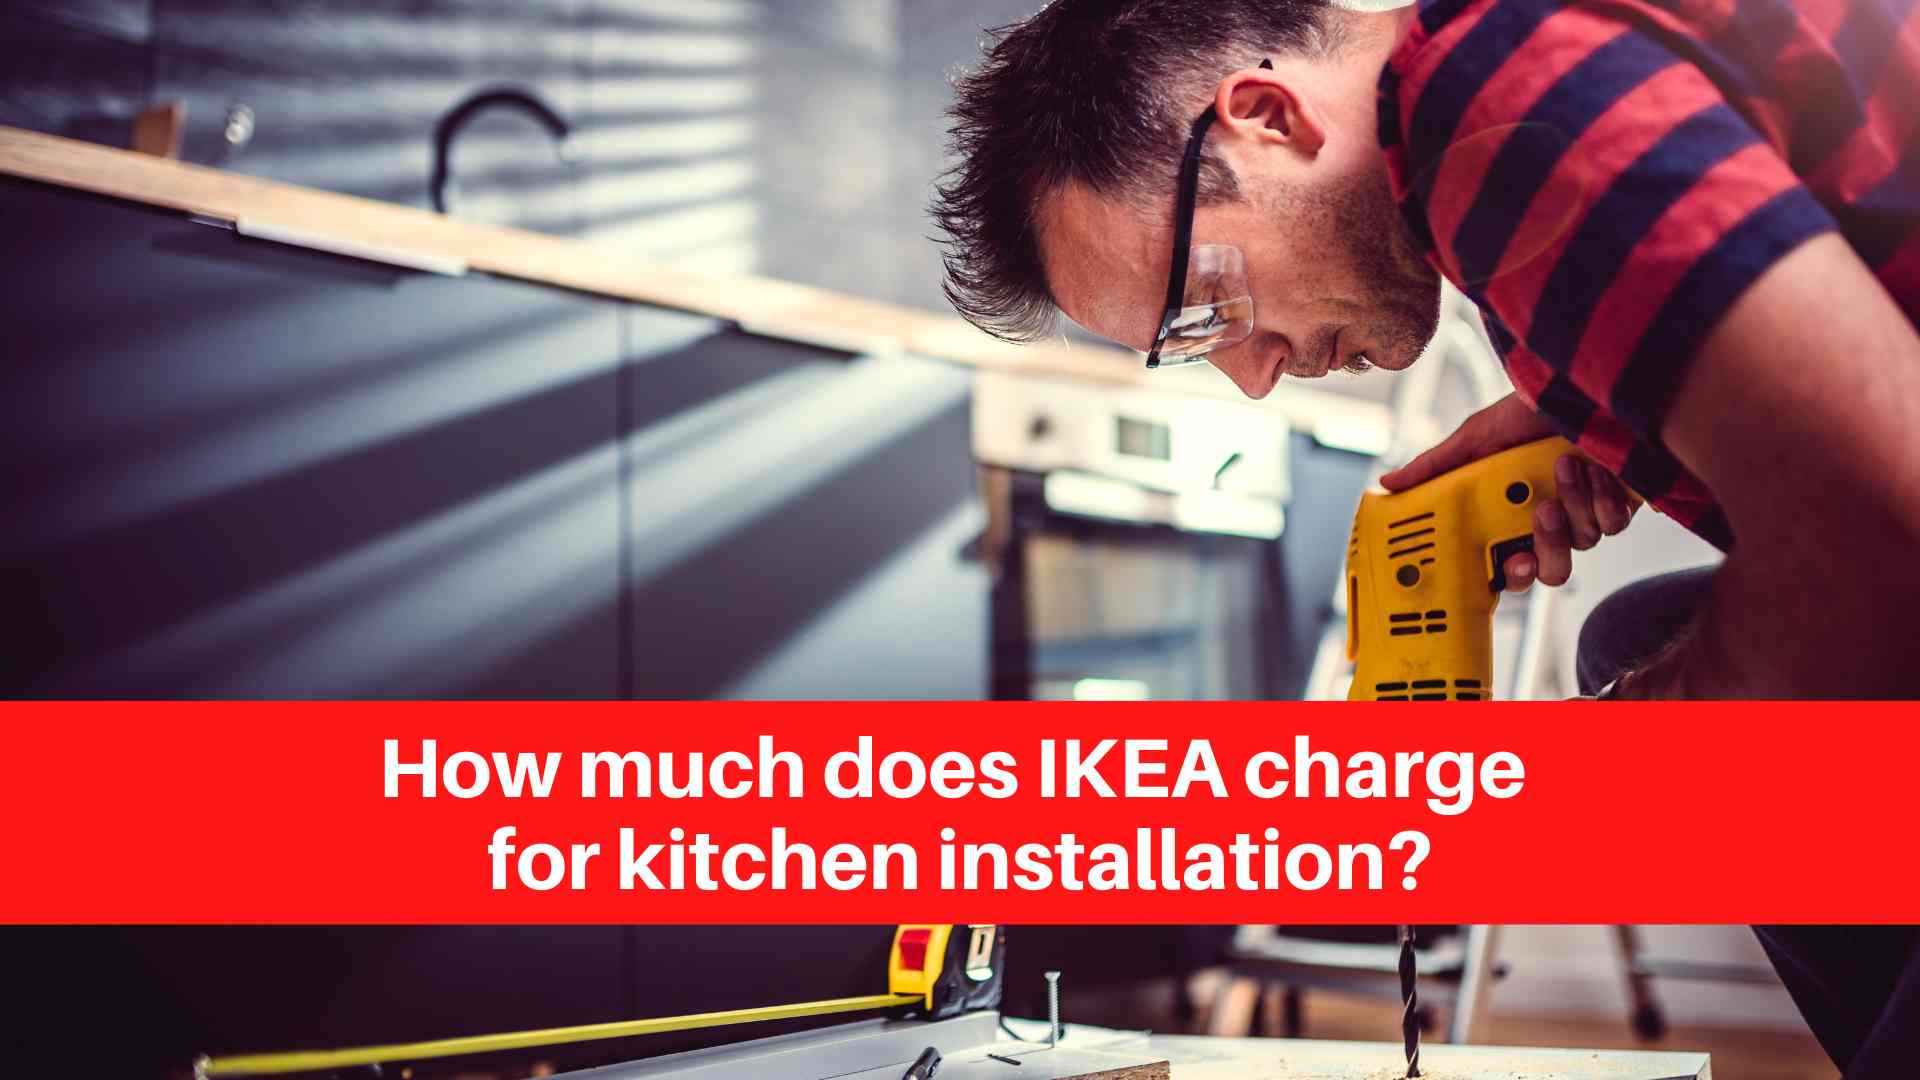 How much does IKEA charge for kitchen installation